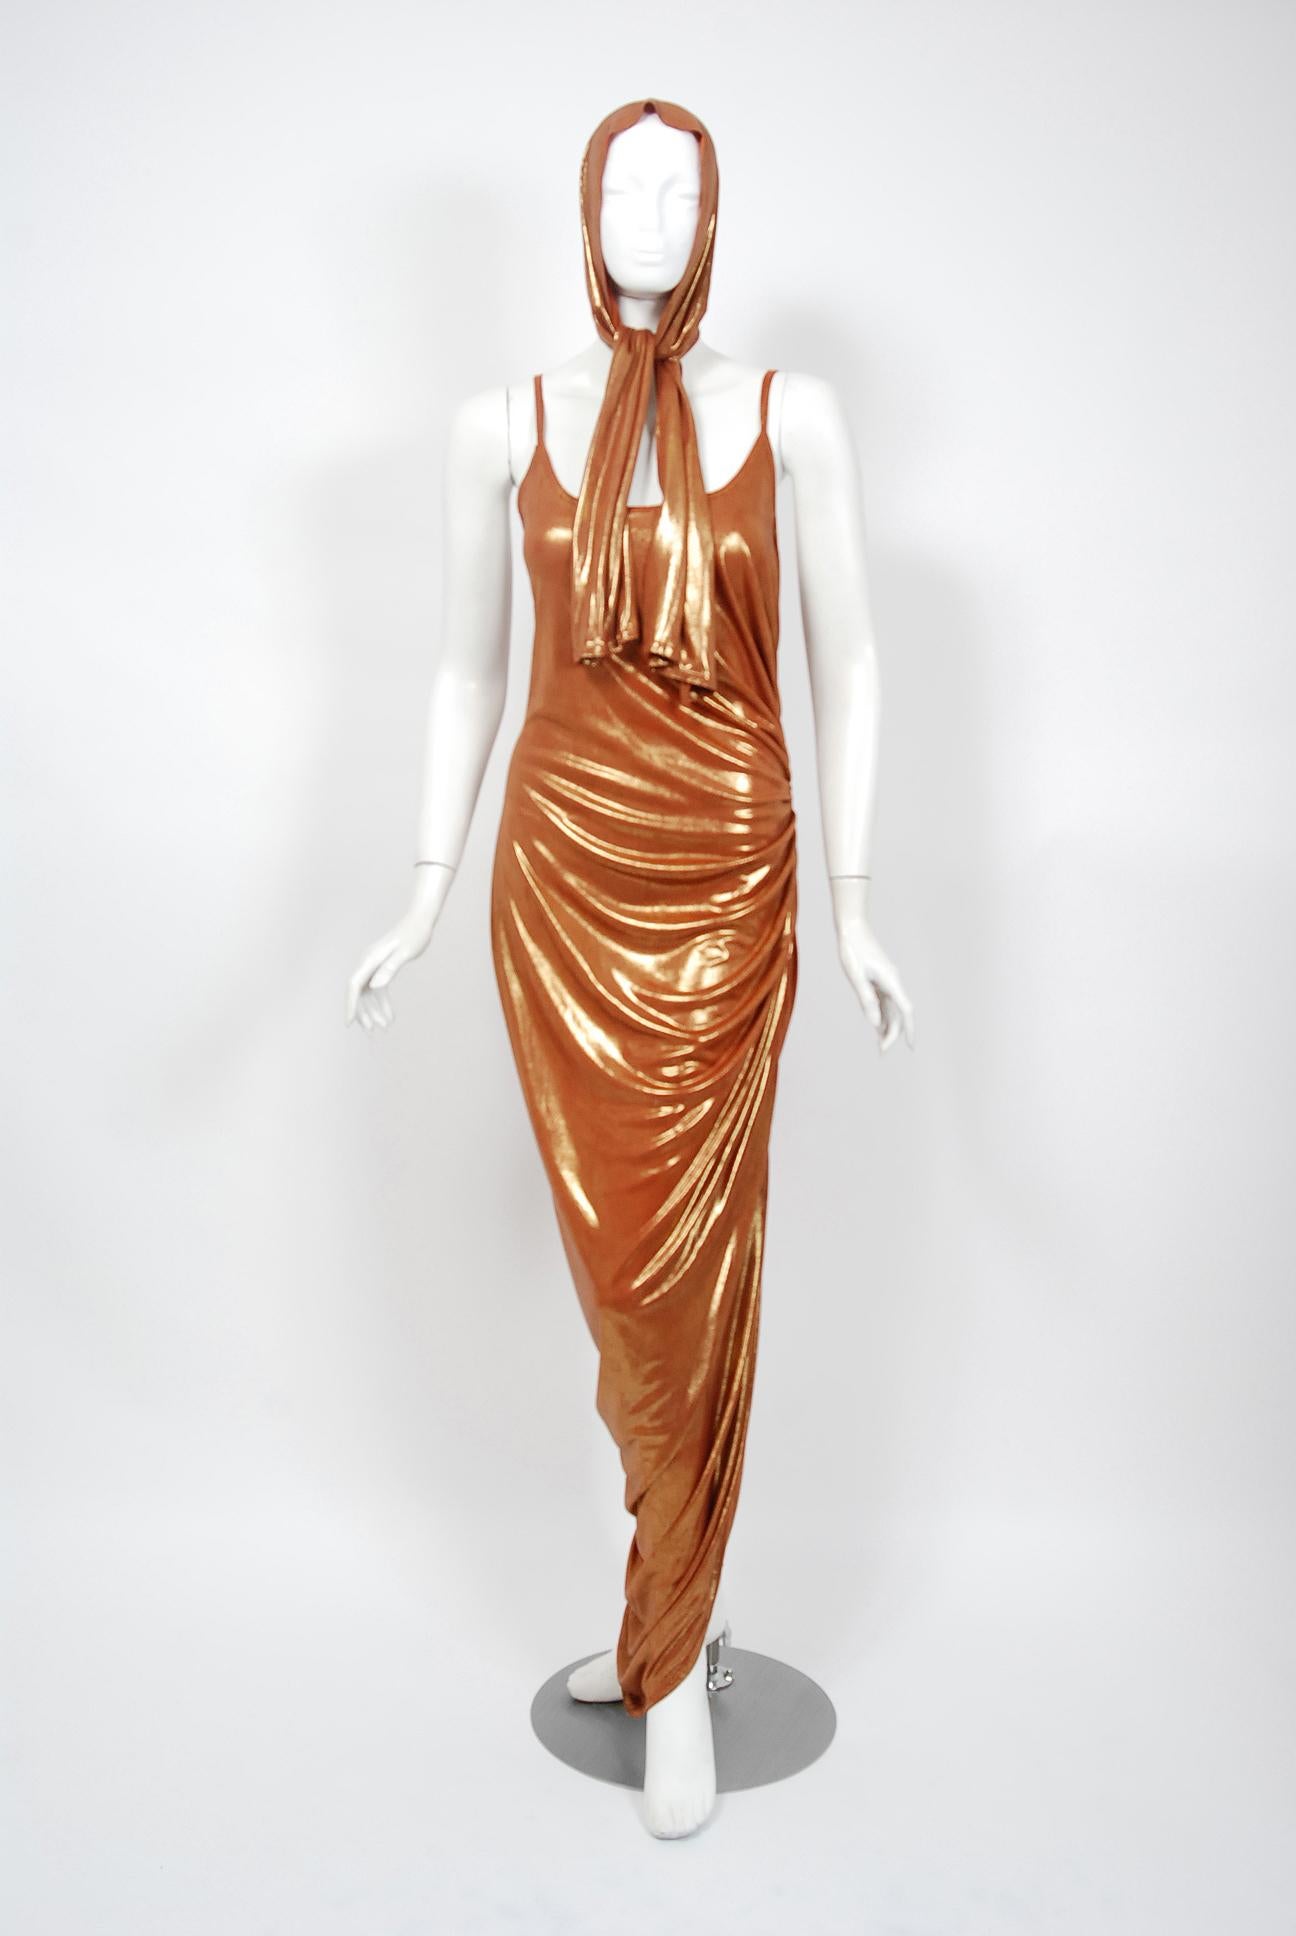 With its vibrant metallic bronze color and flawless styling, this 1970's poly-lurex dress has that disco chicness the 1970's were known for. The low-cut thin strap scoopneck is very flattering and effortless to wear. The one sided ruching is both